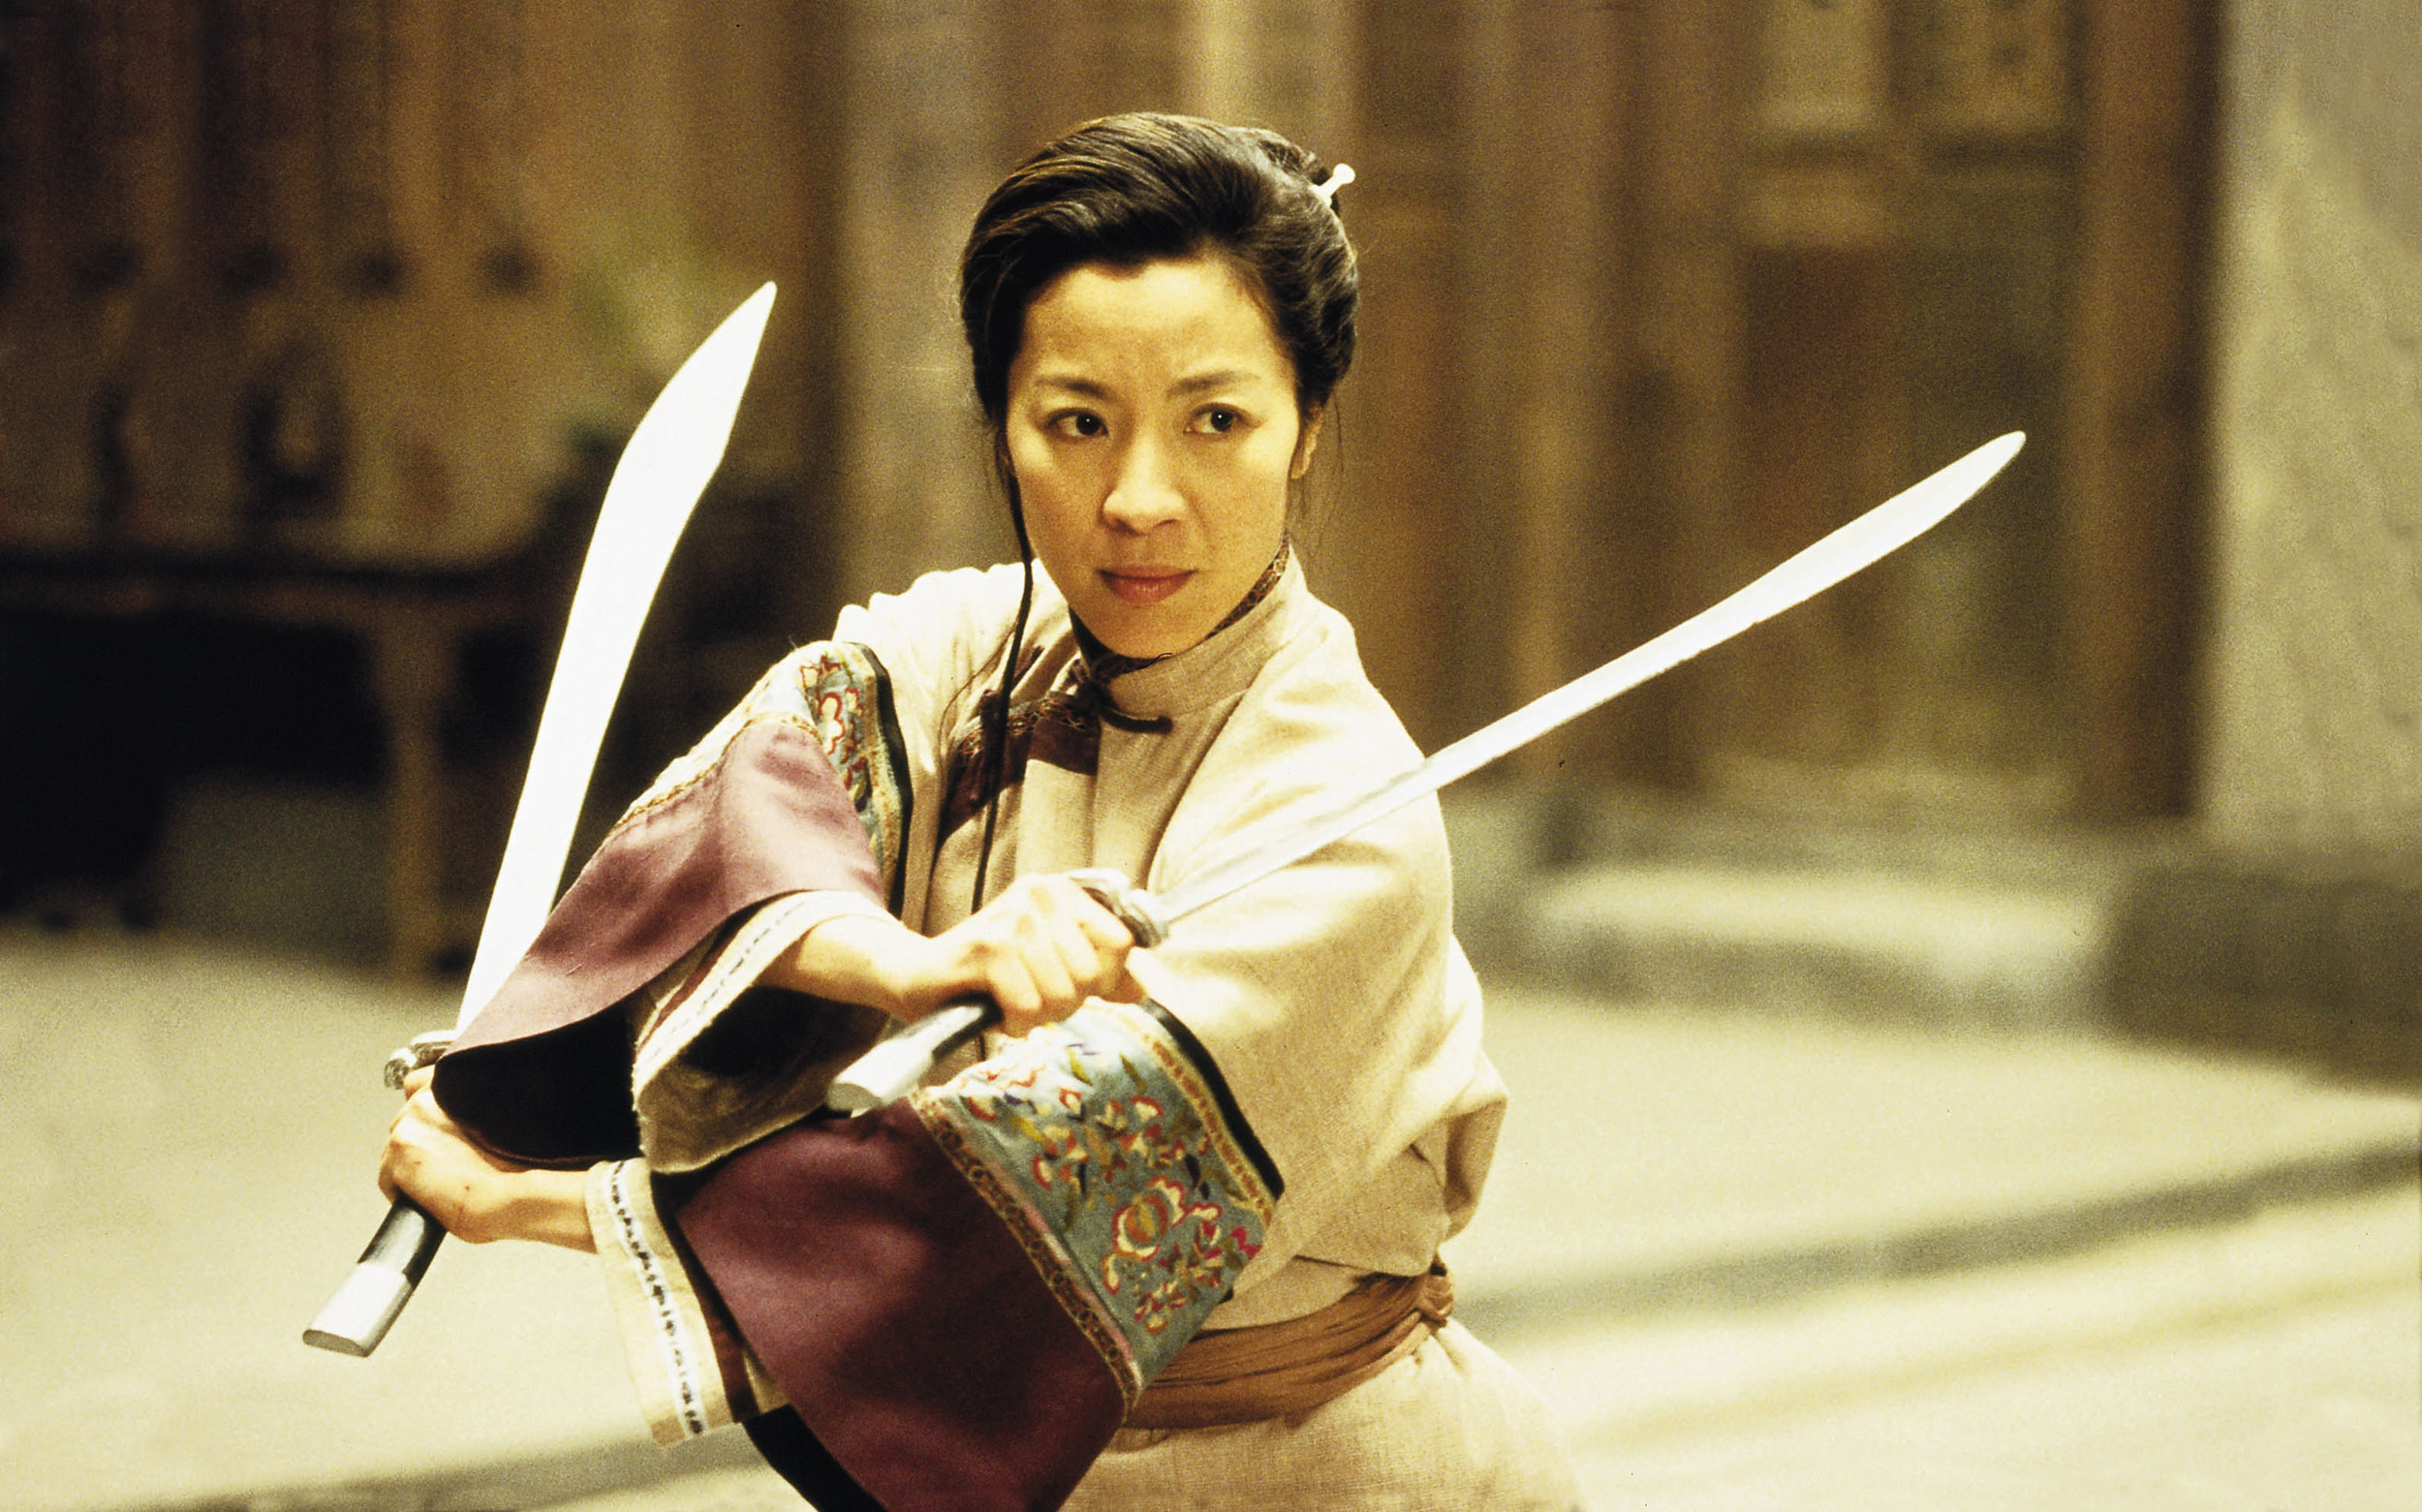 Michelle Yeoh stars in Ang Lee's film "Crouching Tiger, Hidden Dragon" in this undated handout photo released to the media on July 17, 2012. Best Foreign Film Oscar-winning "Crouching Tiger, Hidden Dragon" became the highest grossing foreign film in the U.S. in 2001. Source: Edko Films via Bloomberg EDITOR'S NOTE: EDITORIAL USE ONLY. NO SALES.